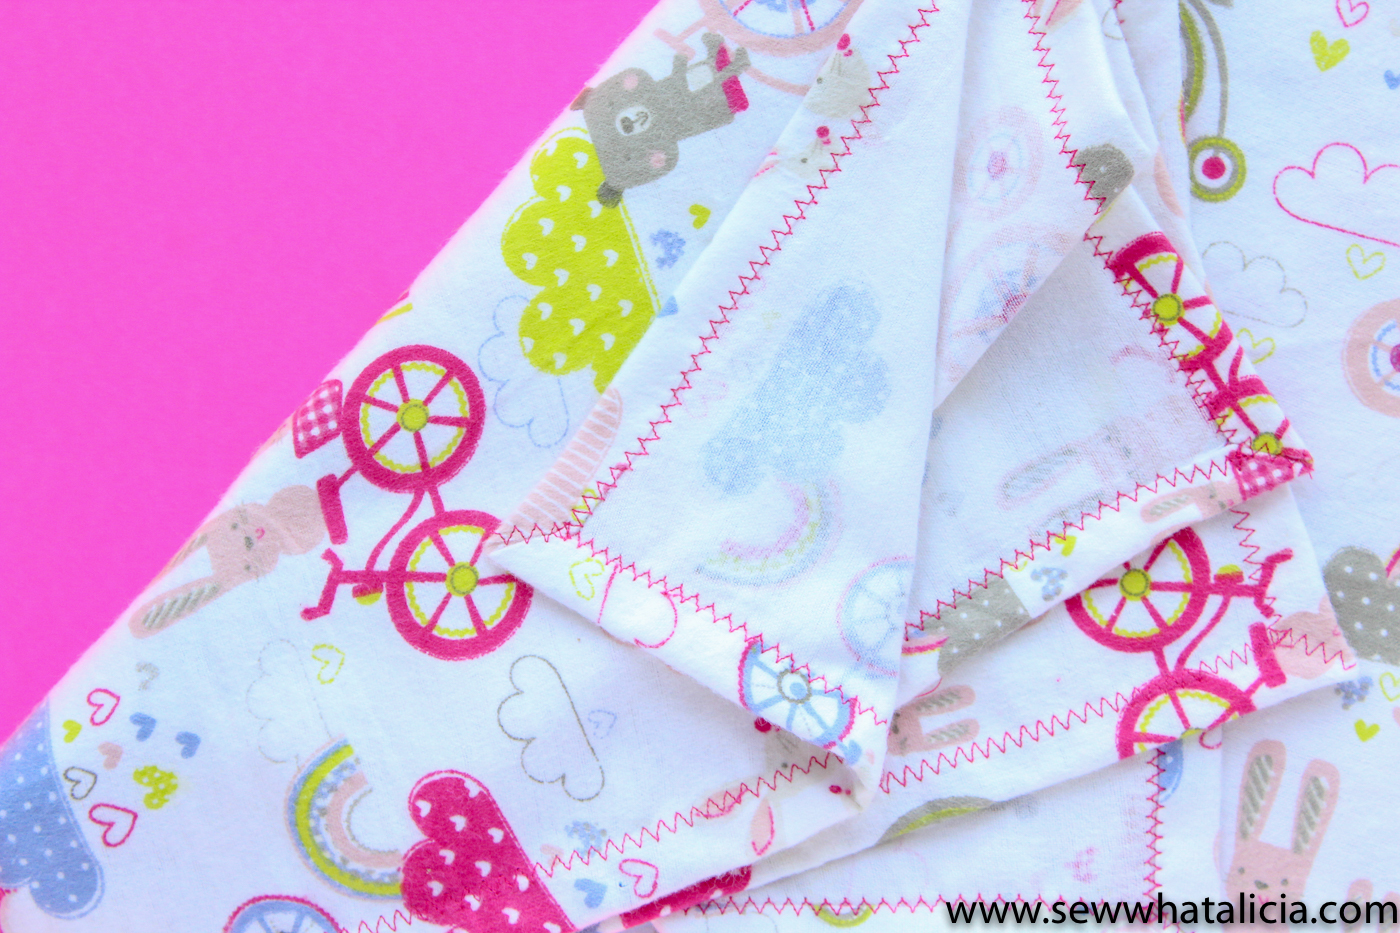 How to Make a Baby Blanket: This beginner sewing tutorial is perfect for anyone wanting to learn to make a receiving blanket . Making a baby blanket is such a special way to show you care. Click through for full tutorial. | www.sewwhatalicia.com